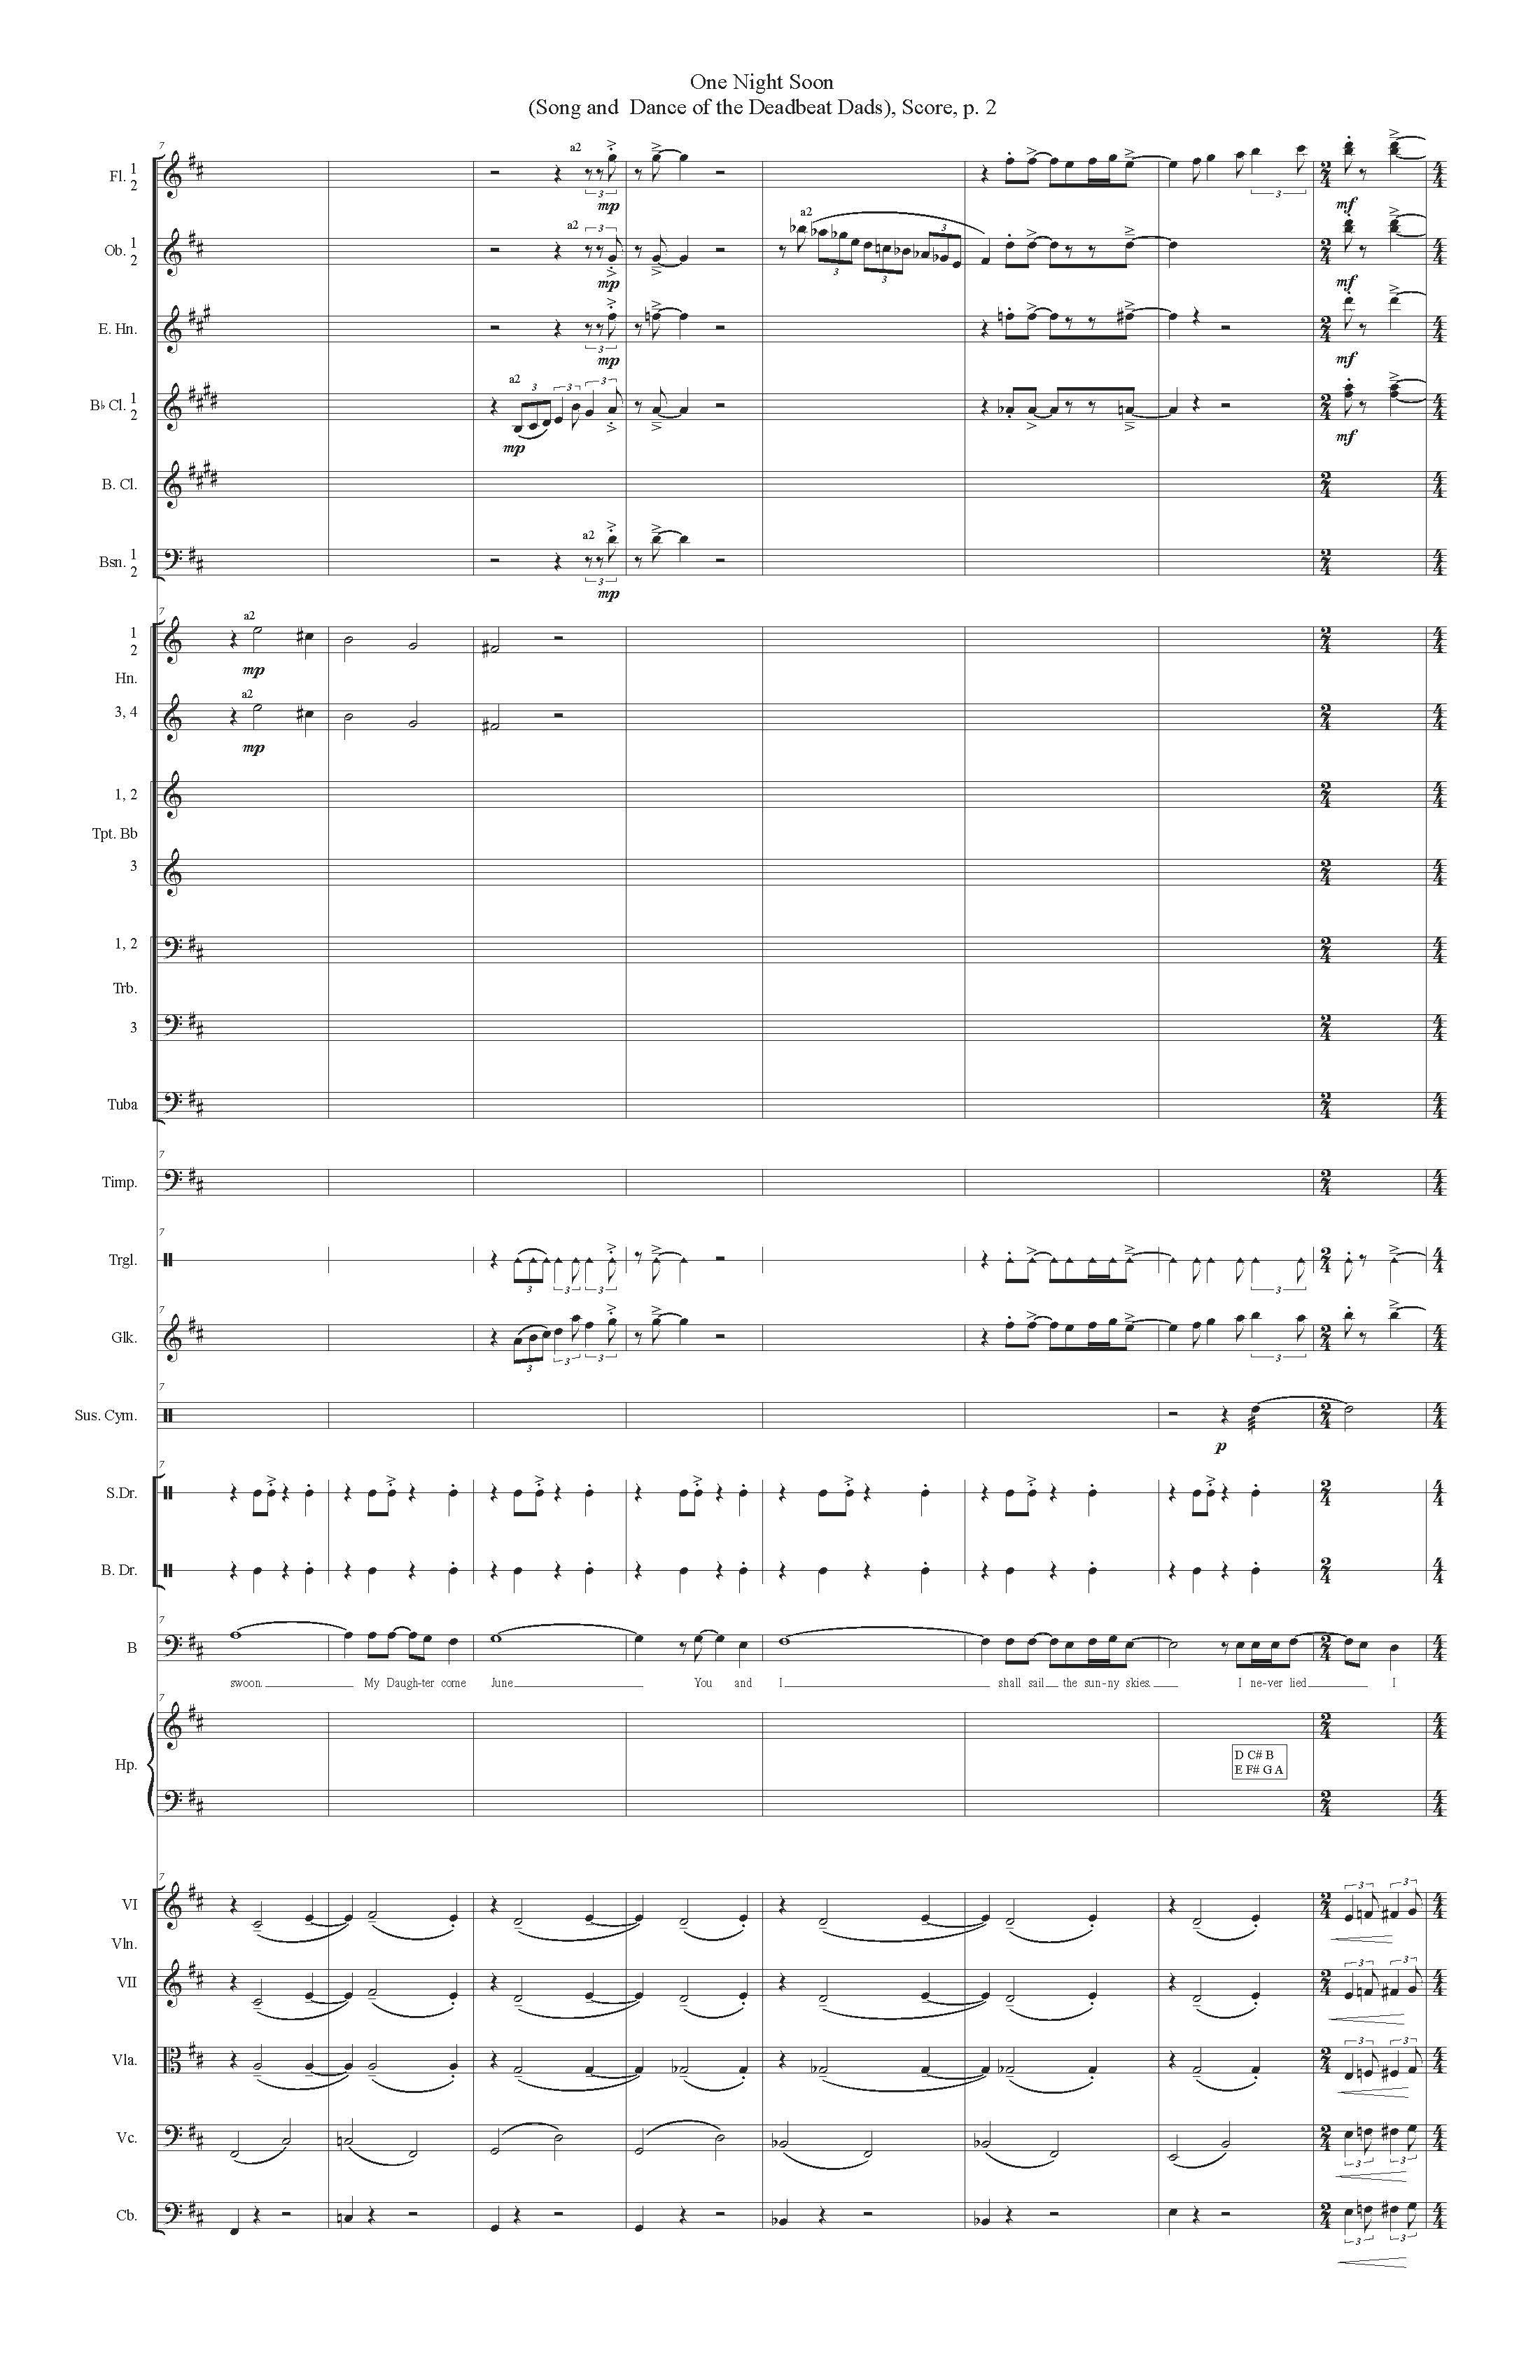 ONE NIGHT SOON ORCH - Score_Page_02.jpg